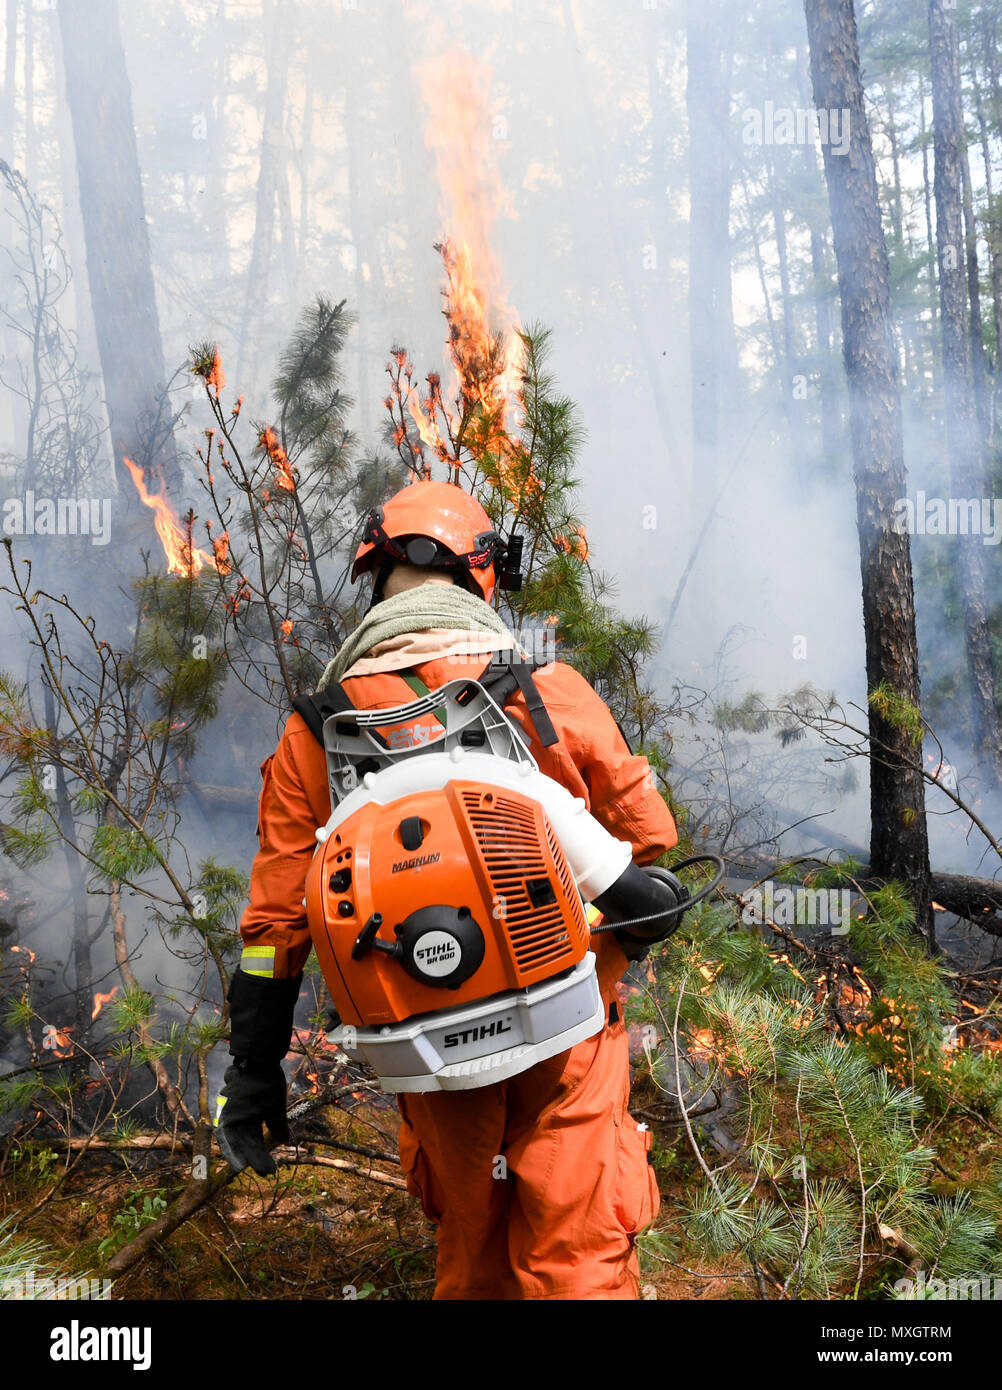 Genhe. 4th June, 2018. A firefighter extinguishes fire at a fire site in the Hanma National Nature Reserve of north China's Inner Mongolia Autonomous Region, June 4, 2018. A forest fire that broke out in Inner Mongolia Autonomous Region has spread to neighboring Heilongjiang Province, local fire authorities said Monday. More than 3,600 firefighters, forest police and items of large fire fighting equipment have been mobilized. Credit: Liu Lei/Xinhua/Alamy Live News Stock Photo